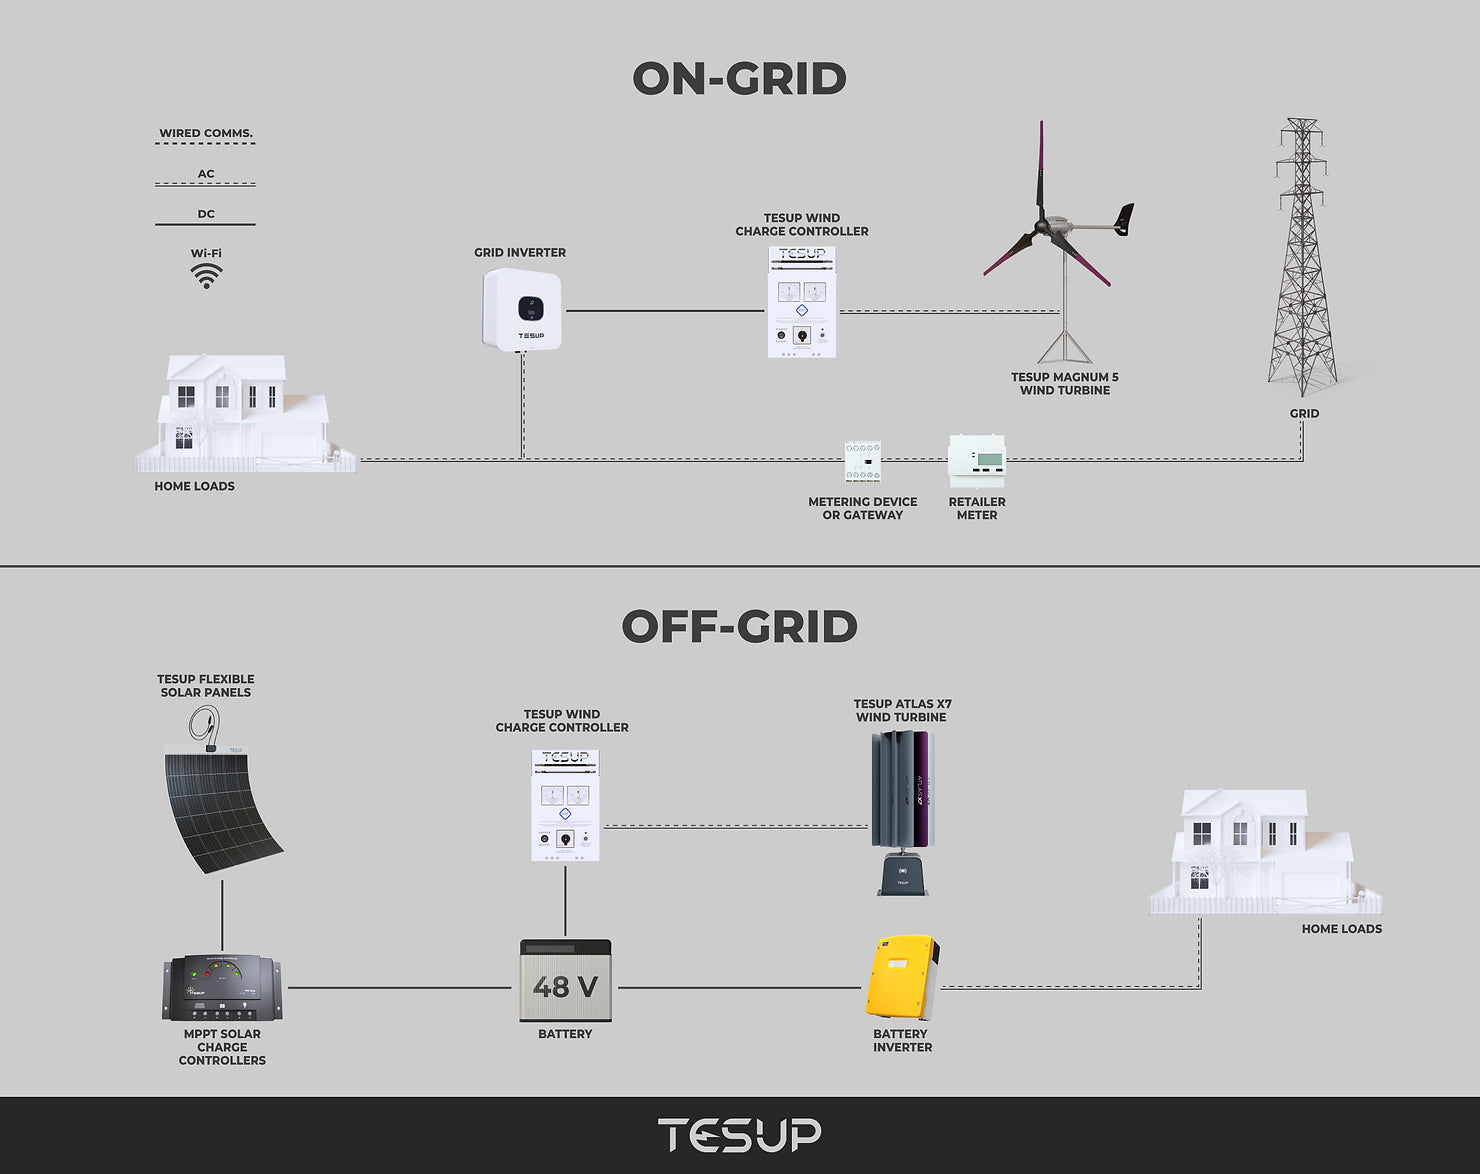 On-grid vs Off-grid: What are the differences?